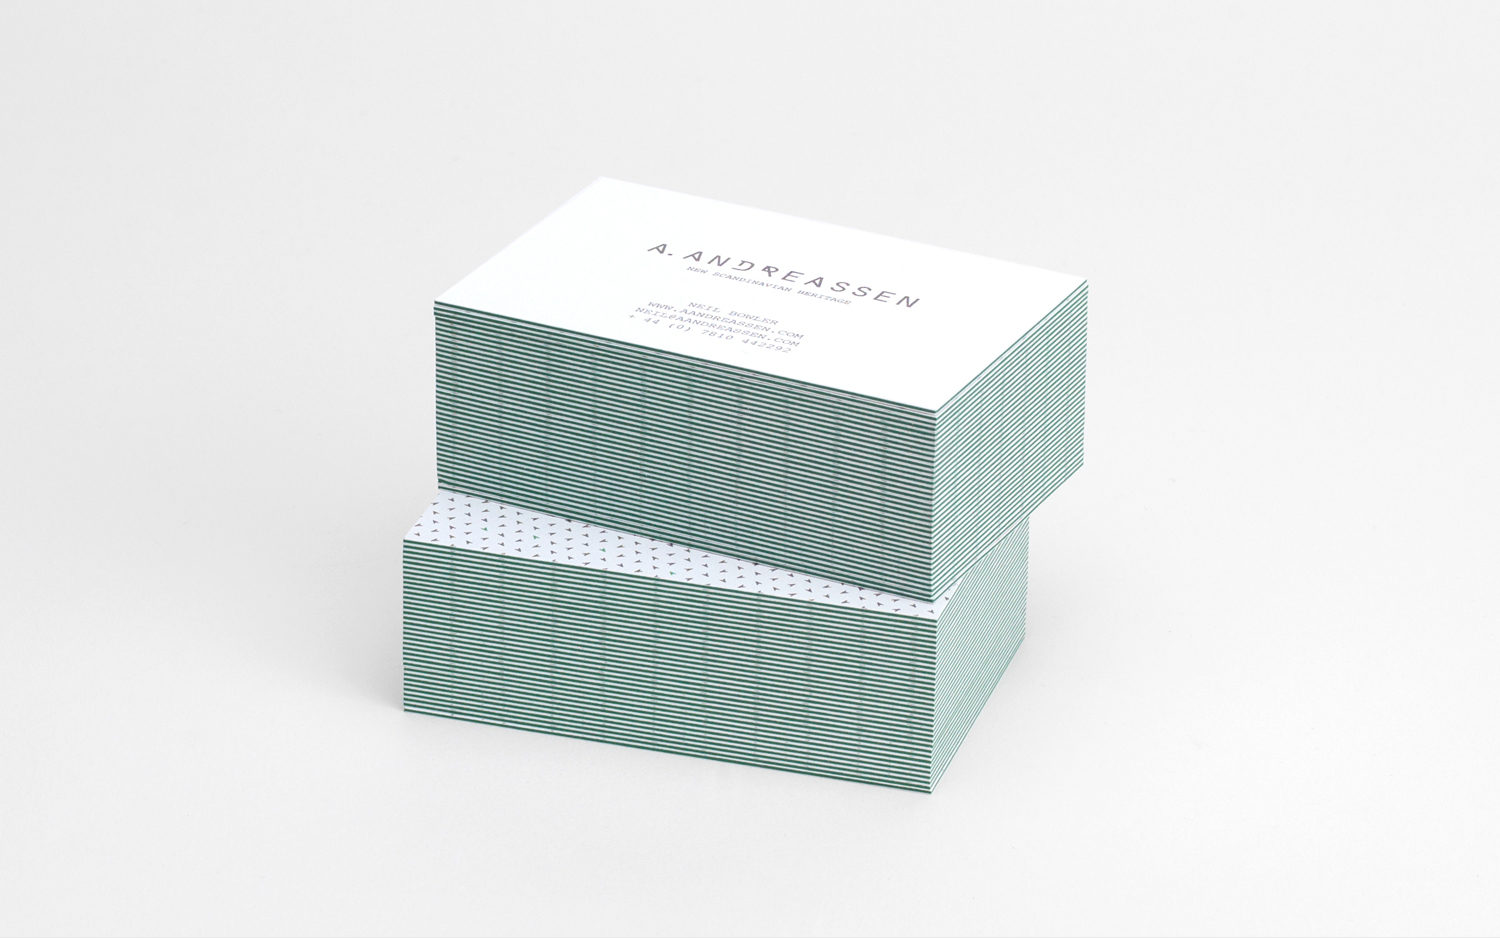 Triplex business cards by graphic design studio Bond for new Scandinavian lifestyle brand A. Andreassen